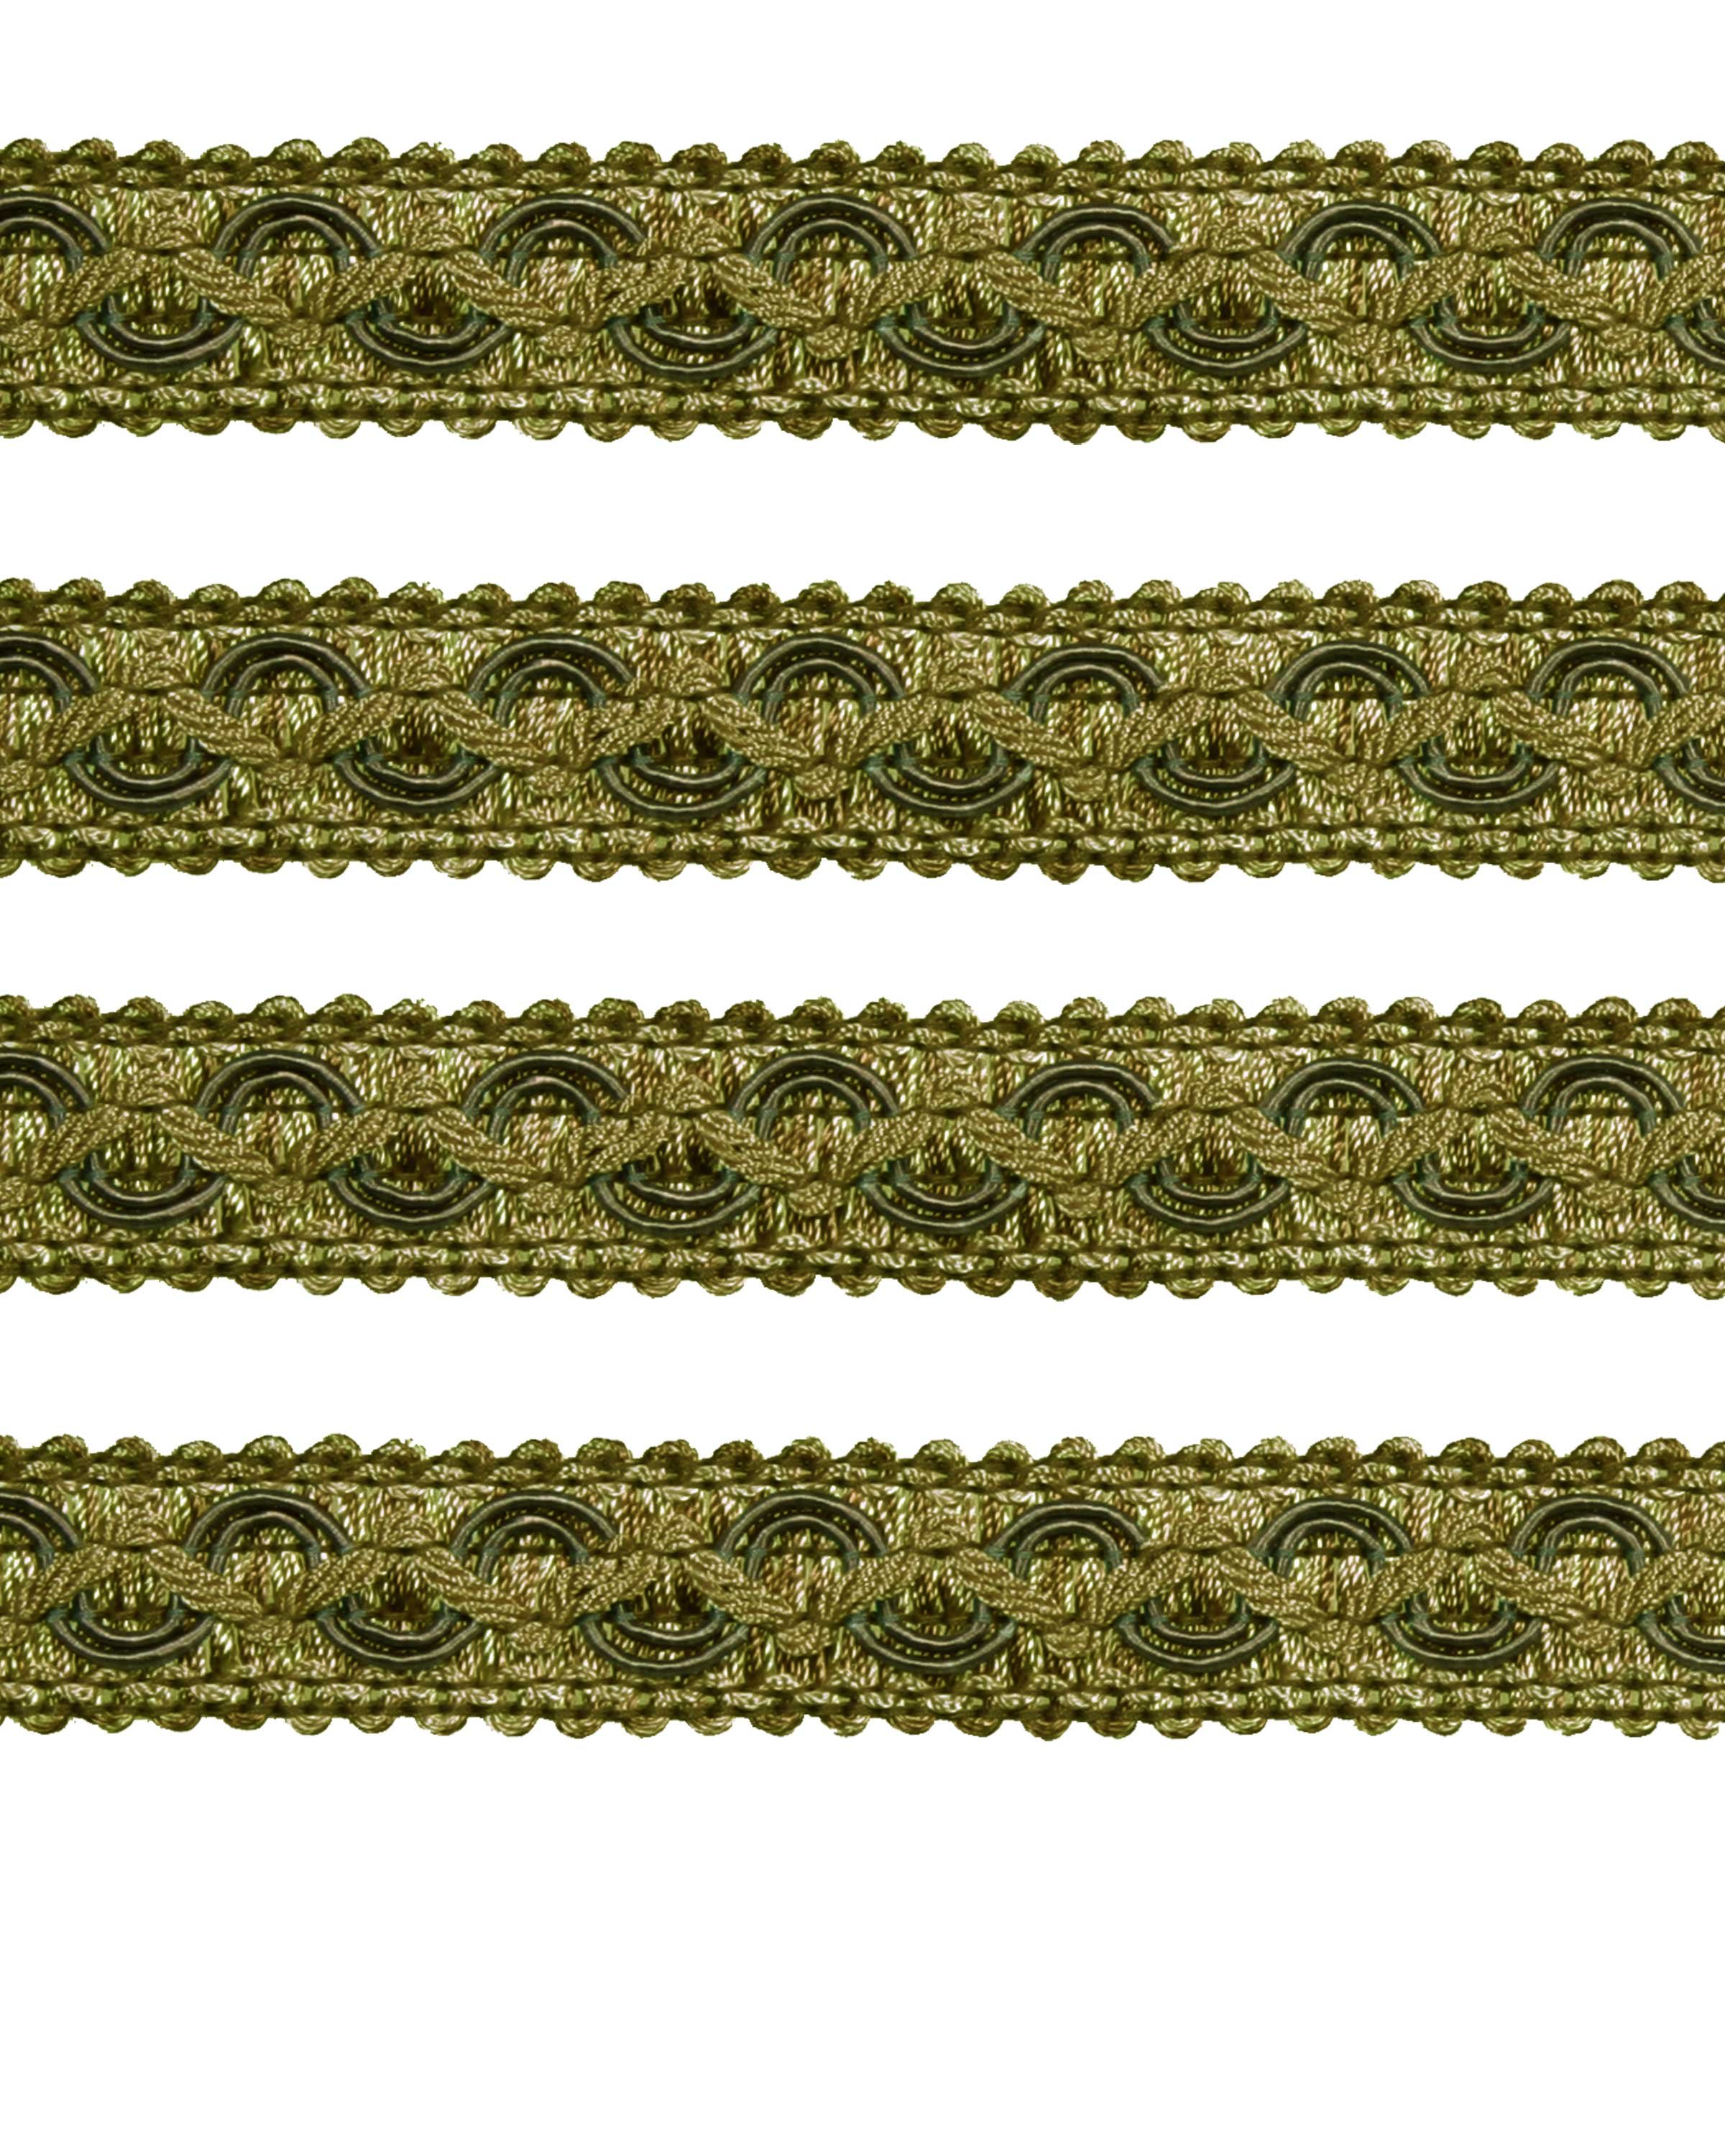 Braid - Olive / Antique Gold 20mm Price is for 5 metres